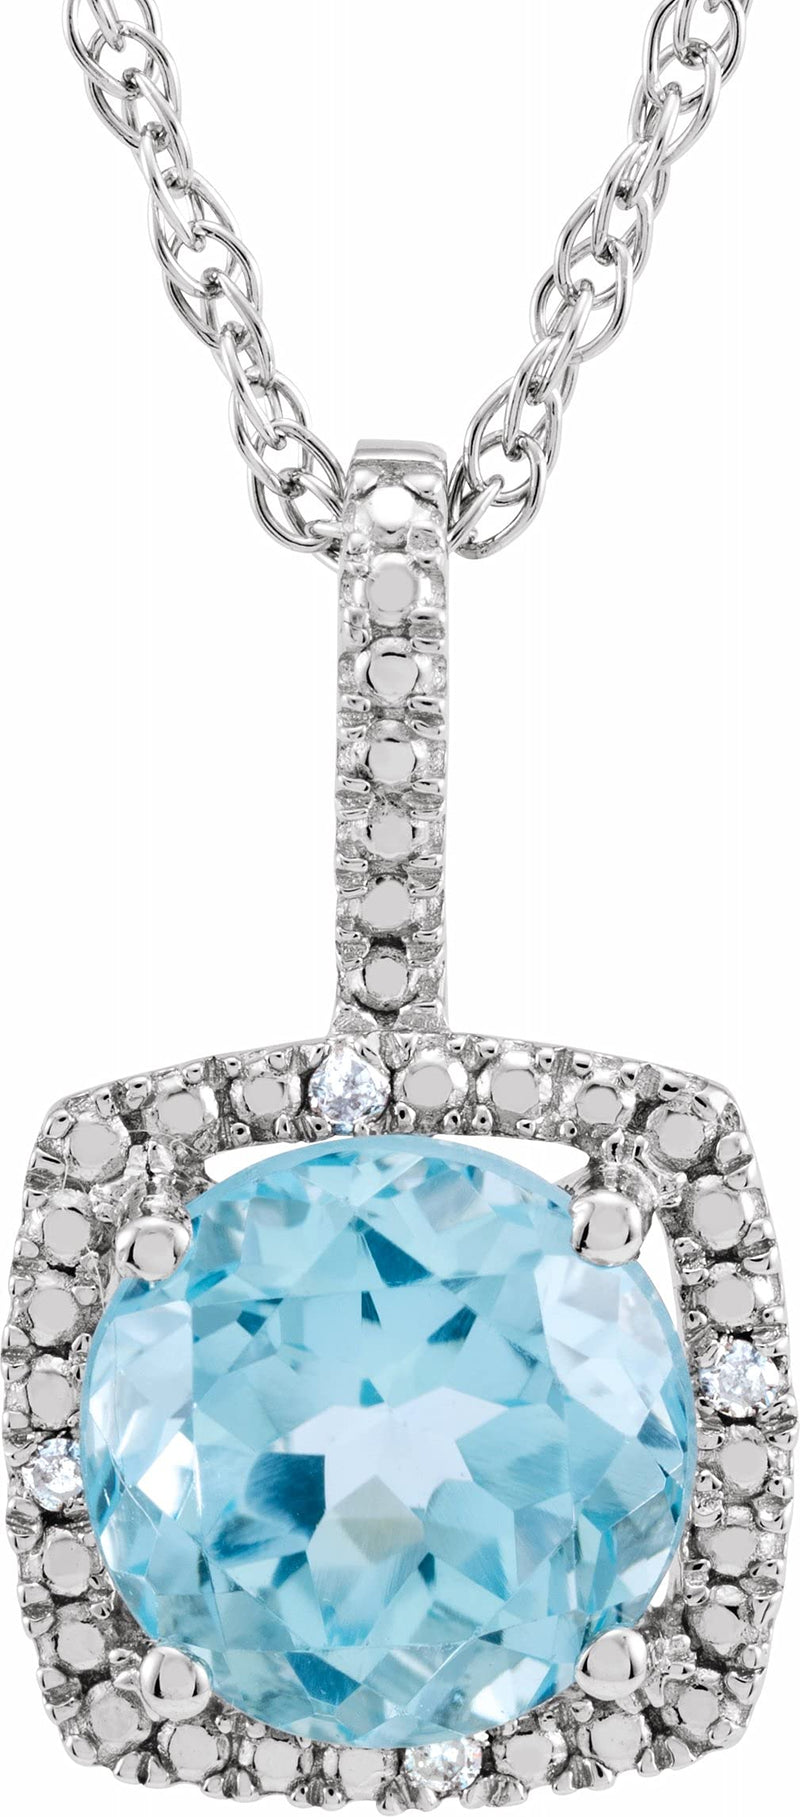 Rhodium-Plated Sterling Silver 1.65 Ct Sky Blue Topaz and Diamond Pendant Necklace 18 Inches (.012 Ctw, HJ, I3)